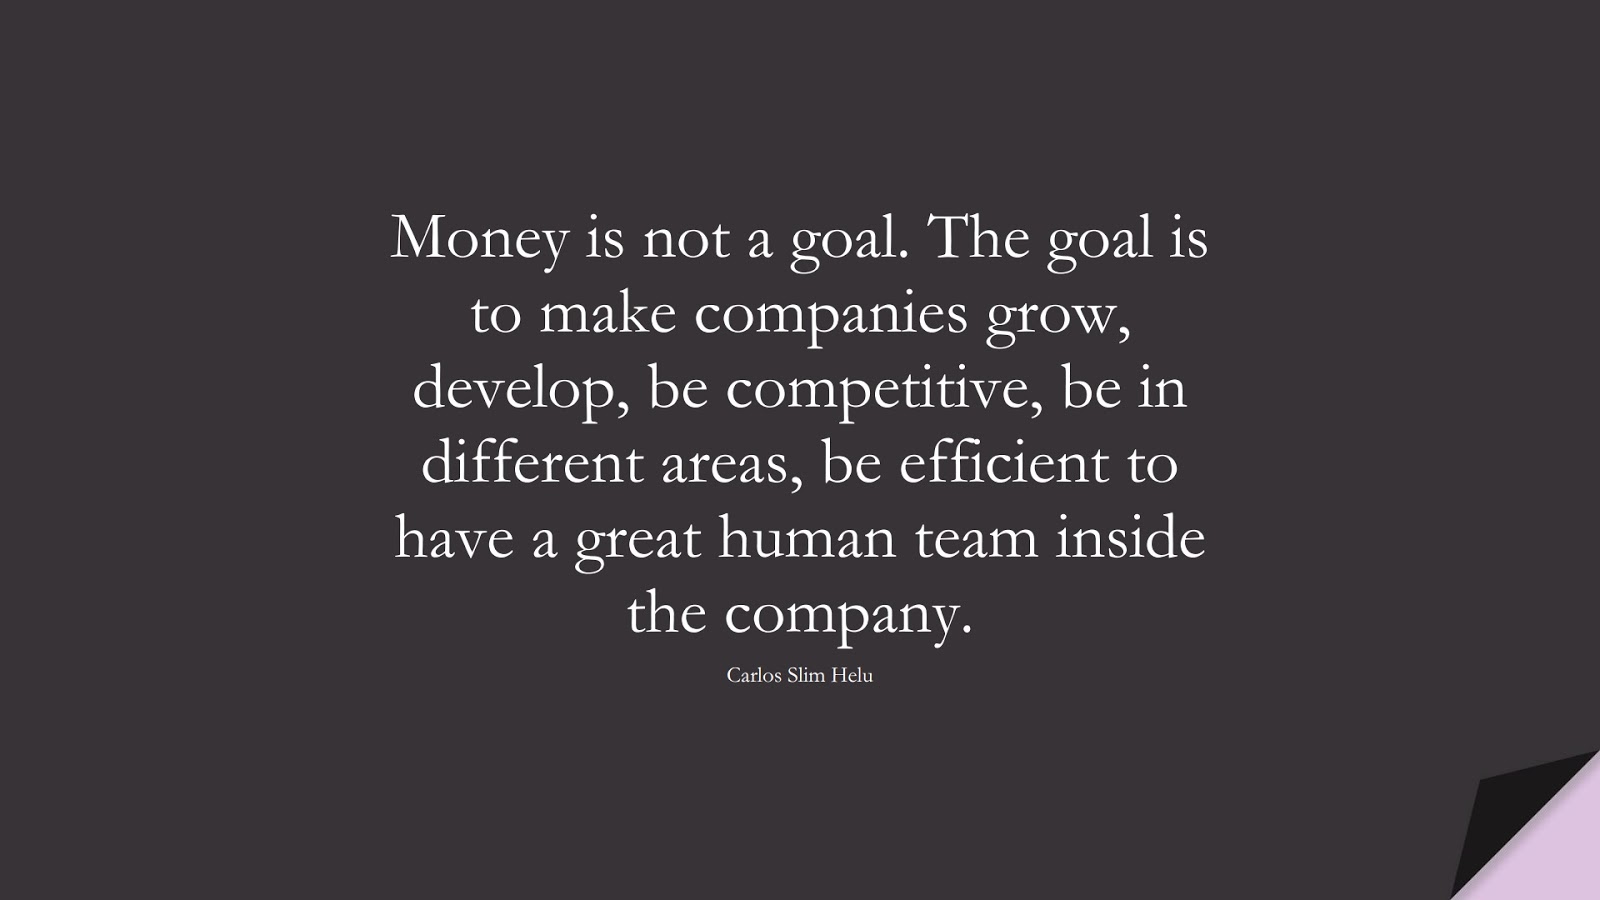 Money is not a goal. The goal is to make companies grow, develop, be competitive, be in different areas, be efficient to have a great human team inside the company. (Carlos Slim Helu);  #MoneyQuotes